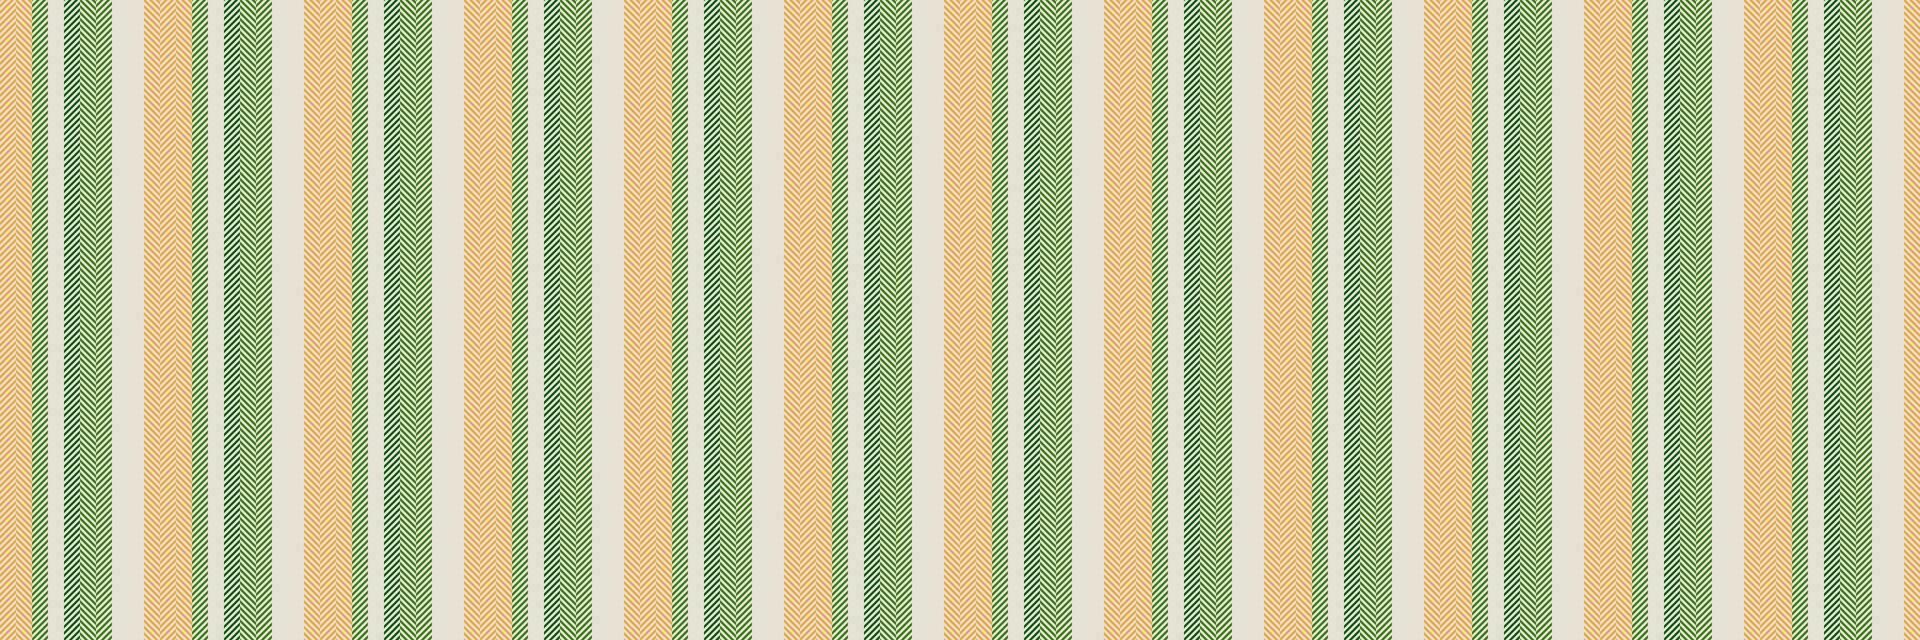 Multicolored vector fabric background, tough stripe pattern textile. Canadian texture lines seamless vertical in white and green colors.